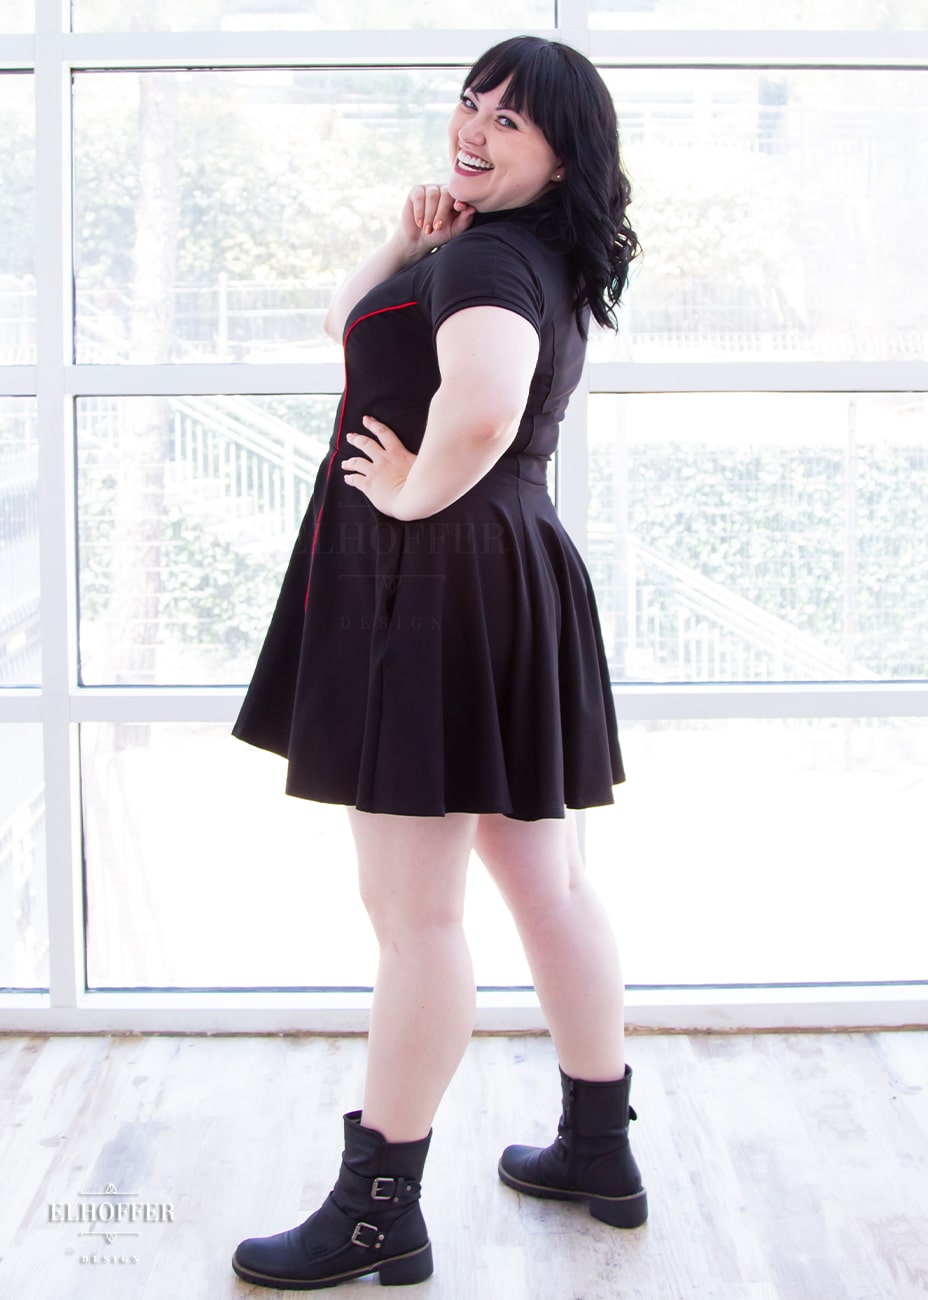 Bernadette, a fair skinned size large model with black hair and bangs, is wearing short raglan sleeved dress with a high neck, invisible front zipper, and princess seams on the front and back as well as pockets. The dress is black with red piping details.